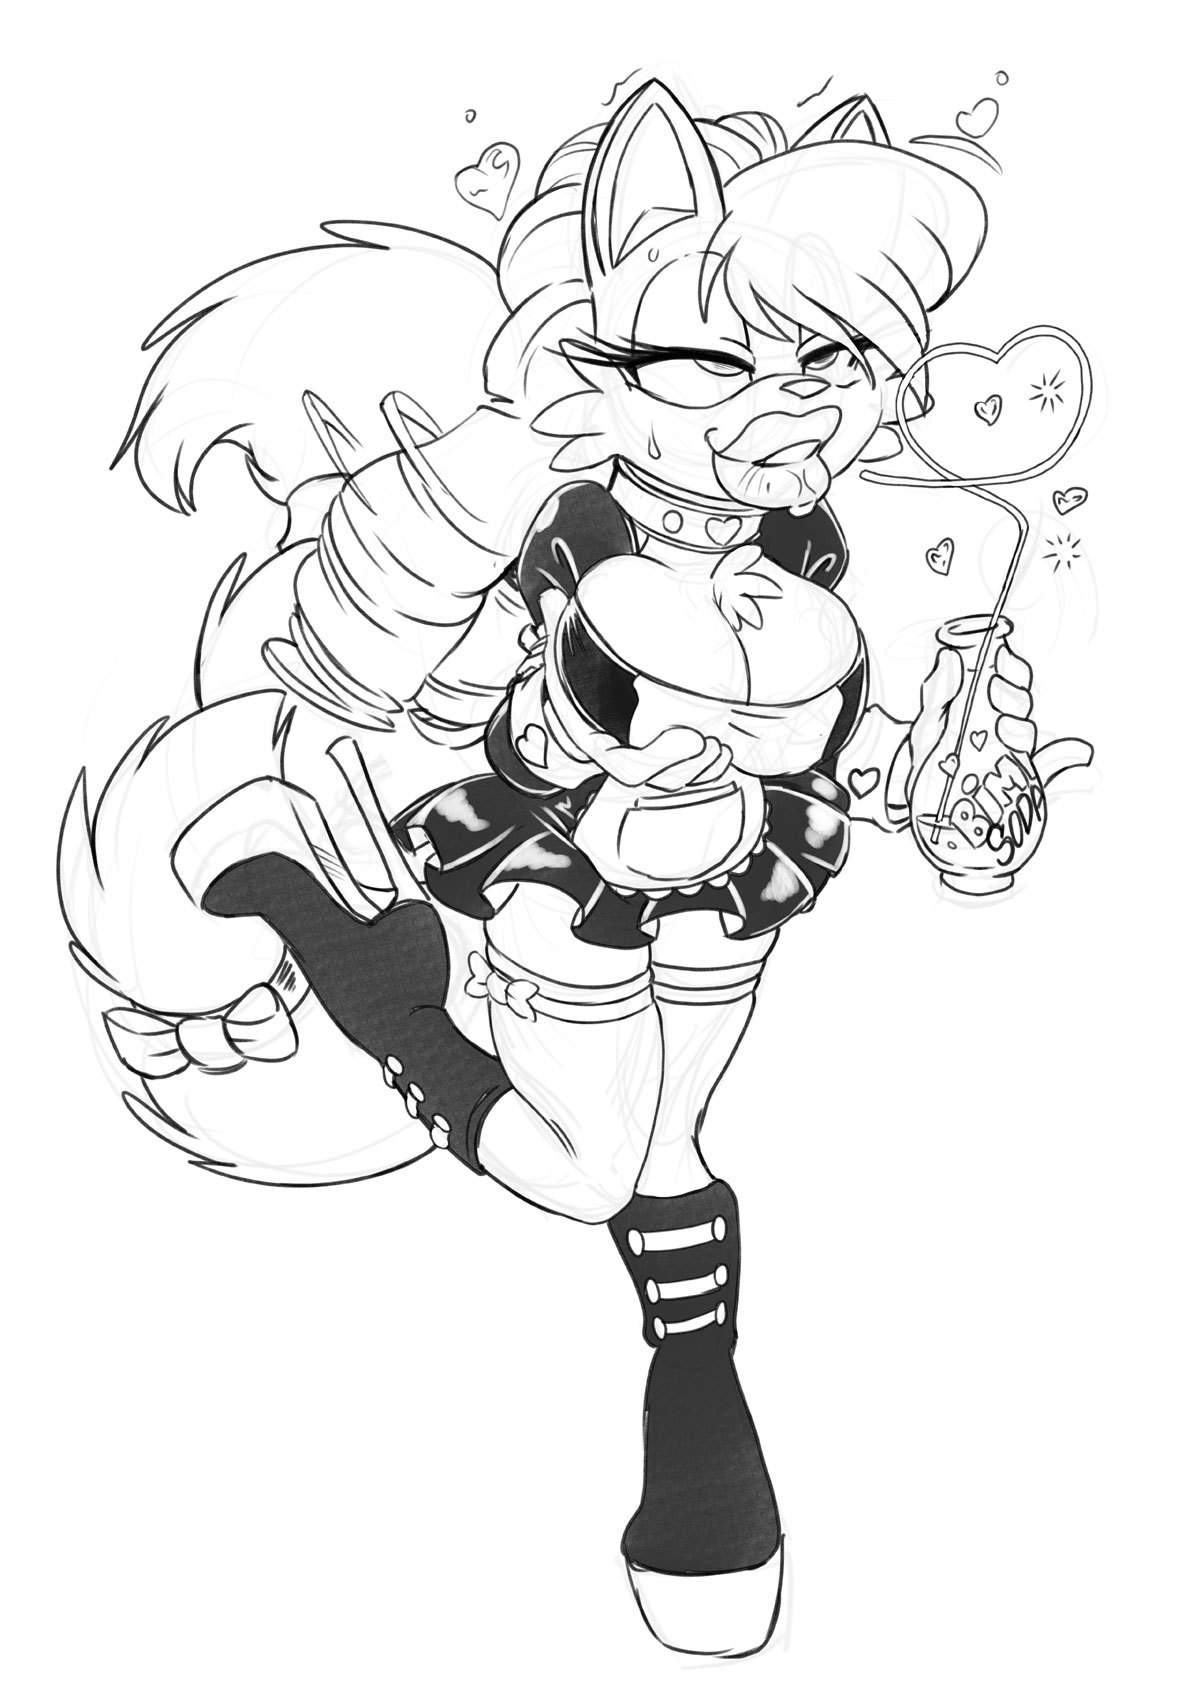 Bimbo SodaSketch Stream Commission for KlowPrower of his Khlo trying out a refreshing